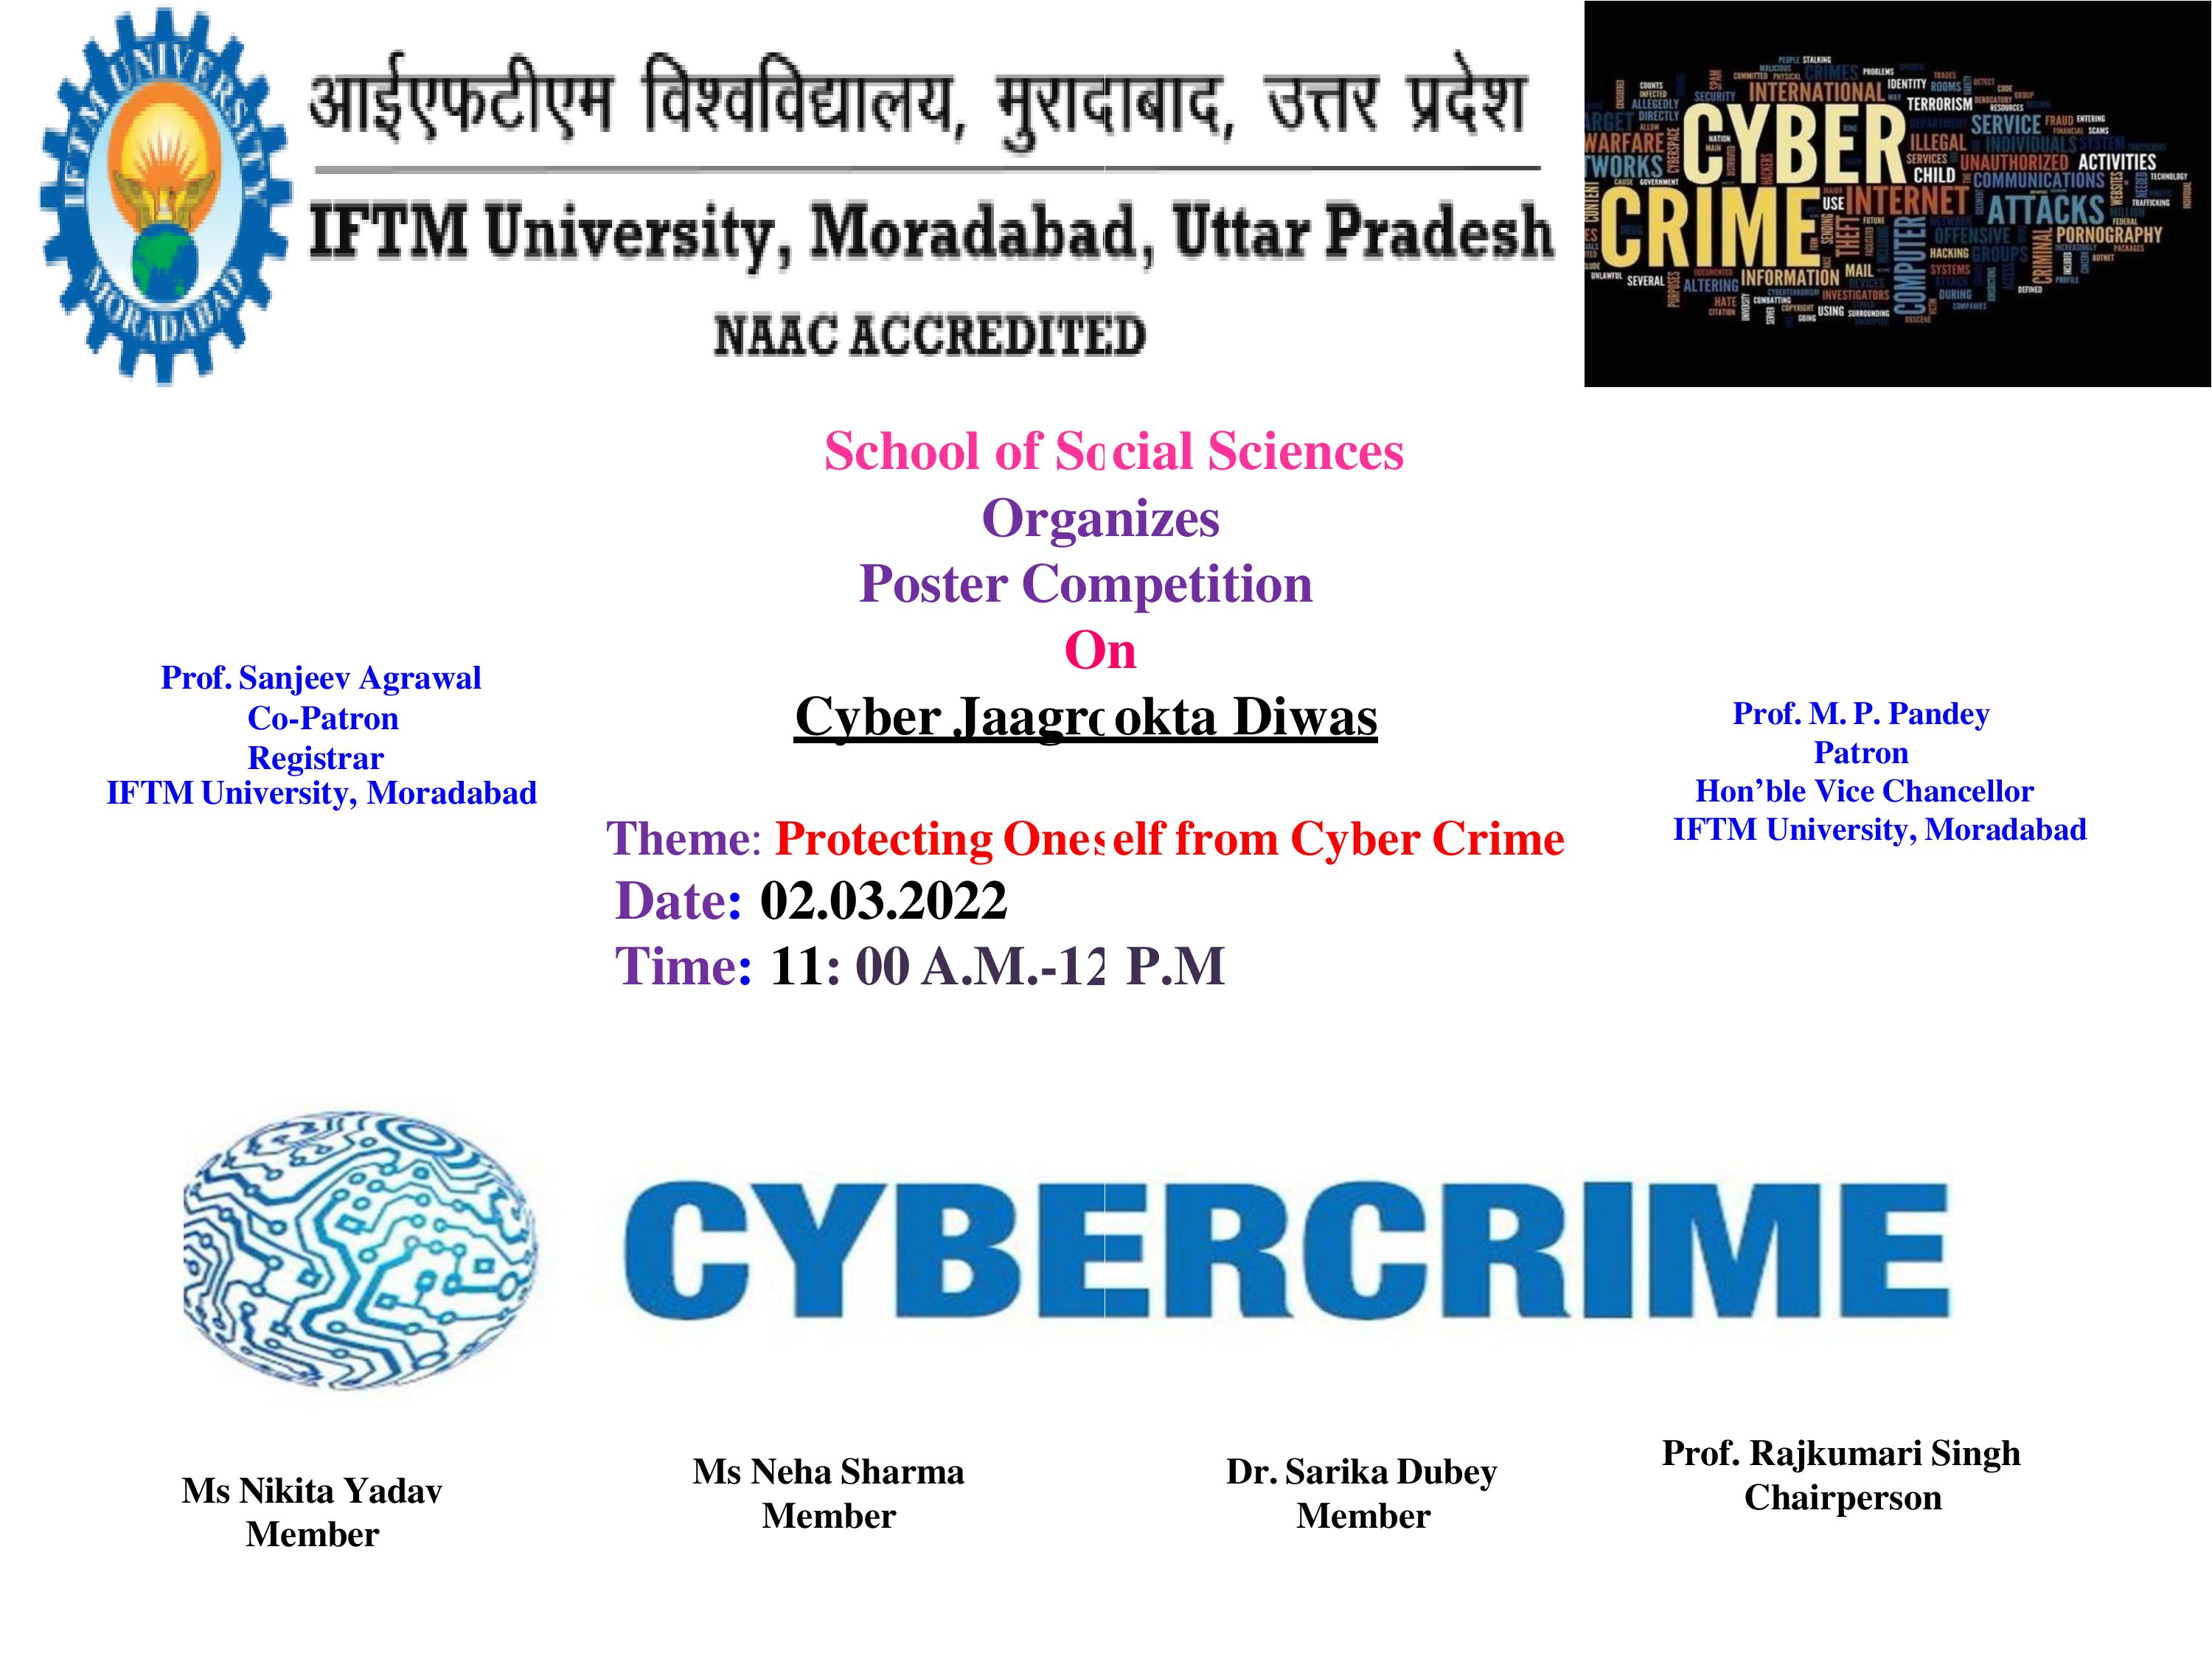 Poster Competition on Cyber Jaagrookta Diwas